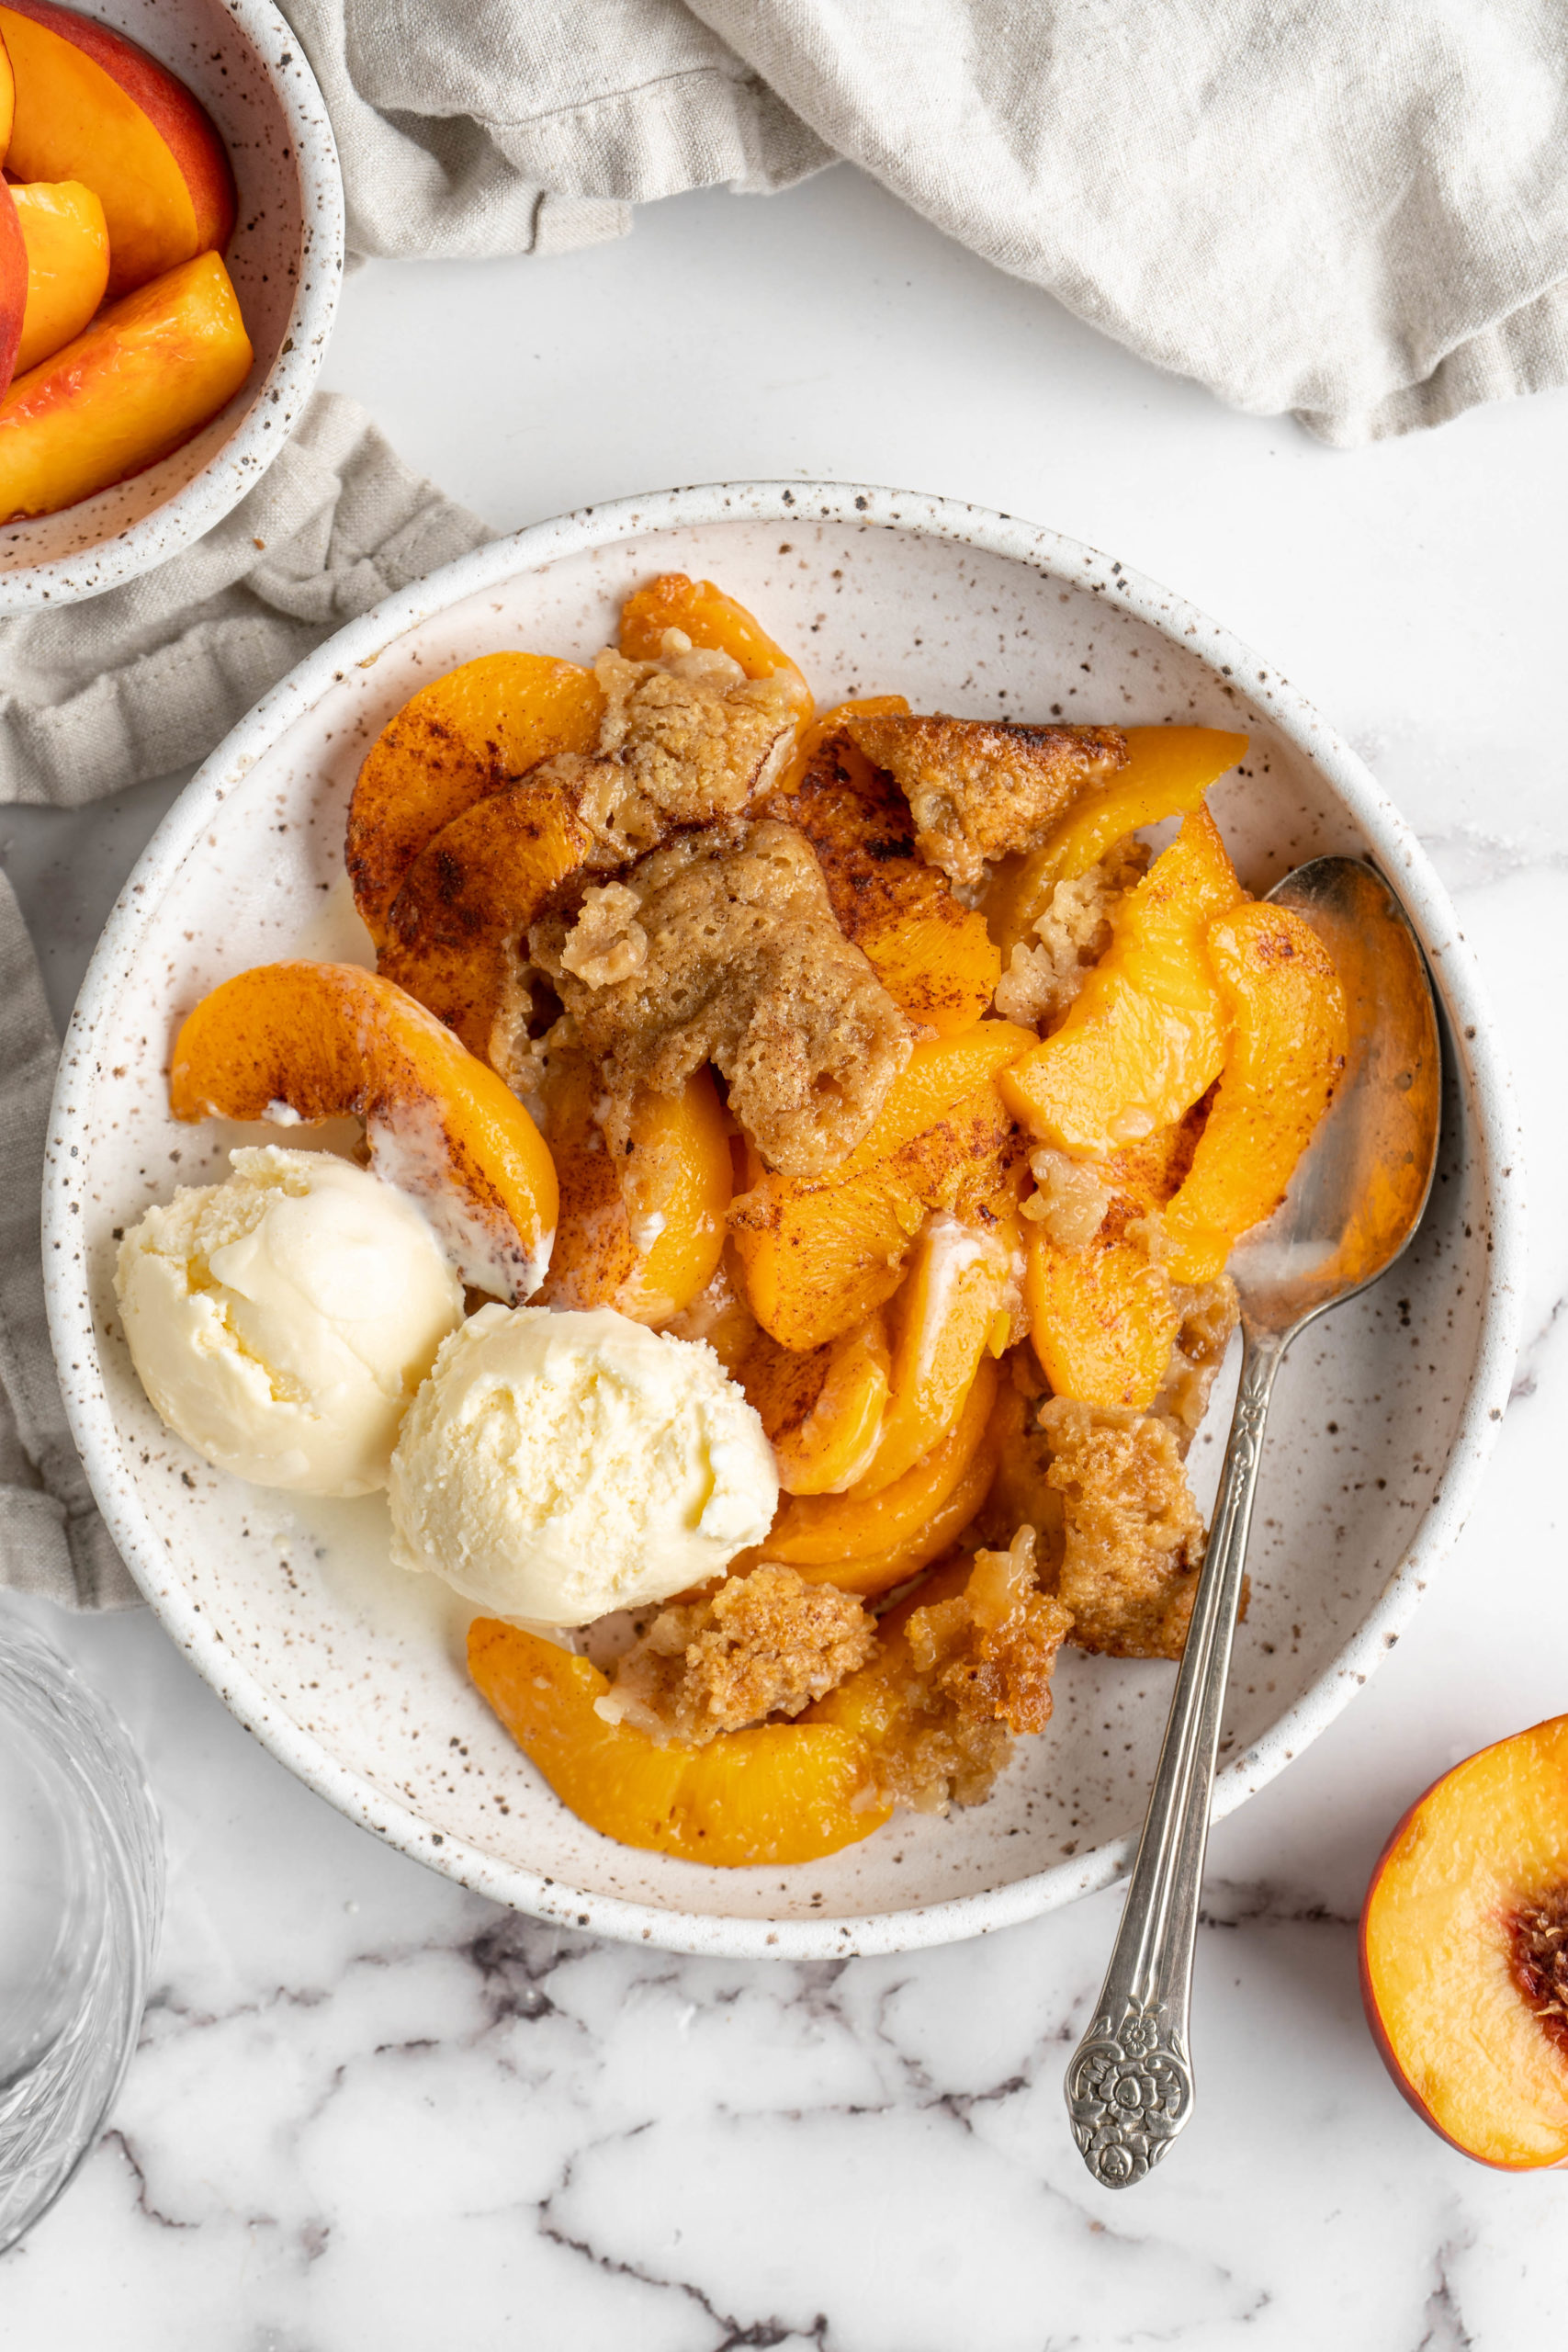 Overhead view of peach cobbler in bowl with scoops of ice cream